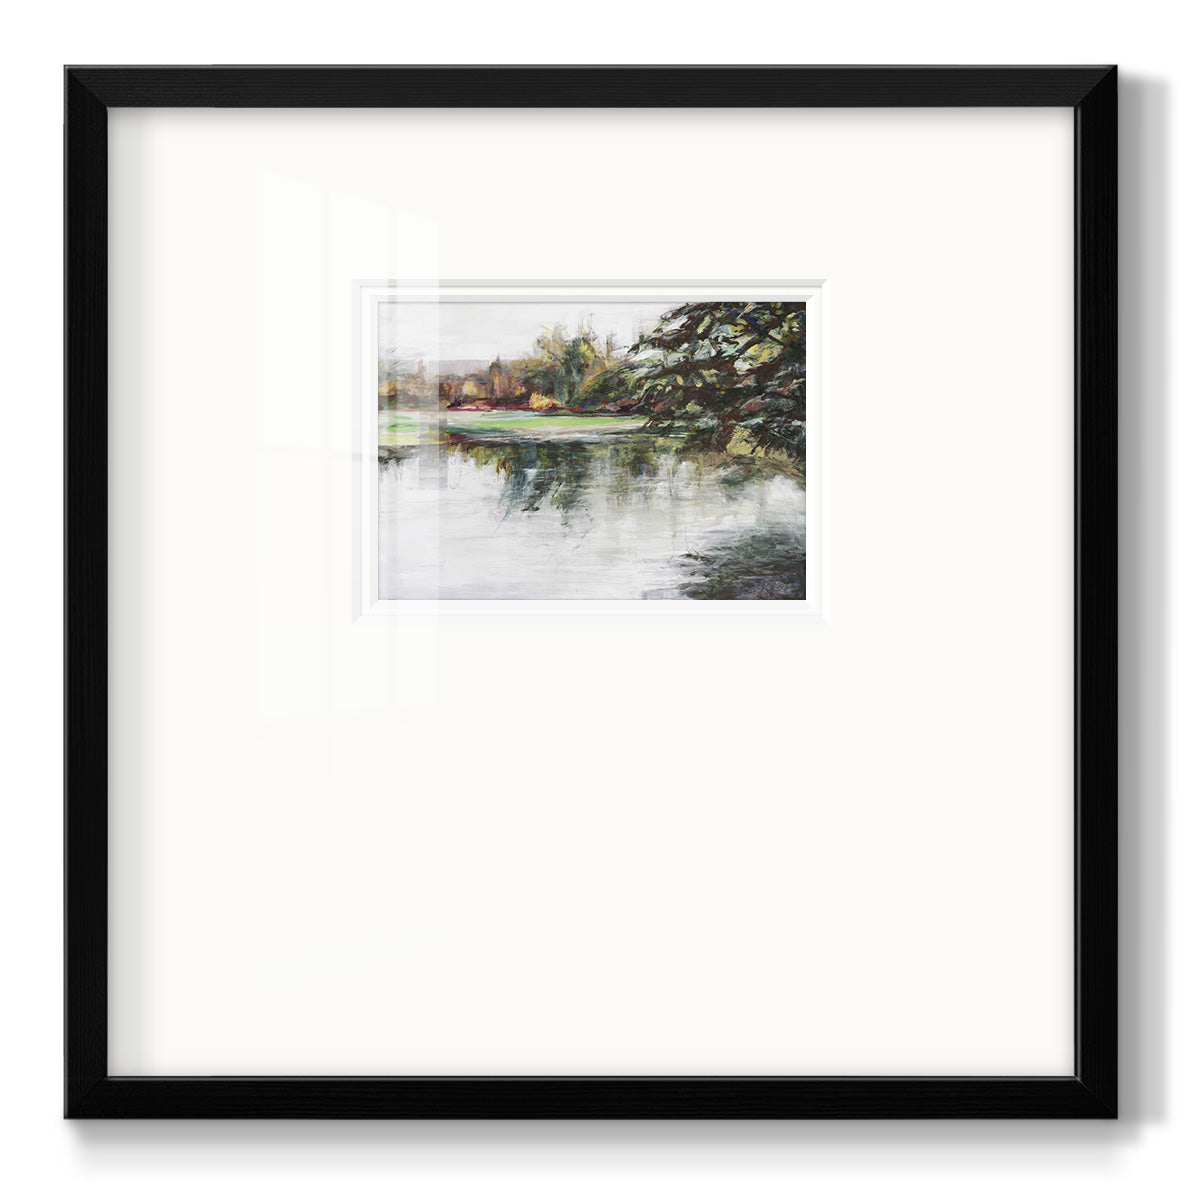 Upon Reflection Premium Framed Print Double Matboard